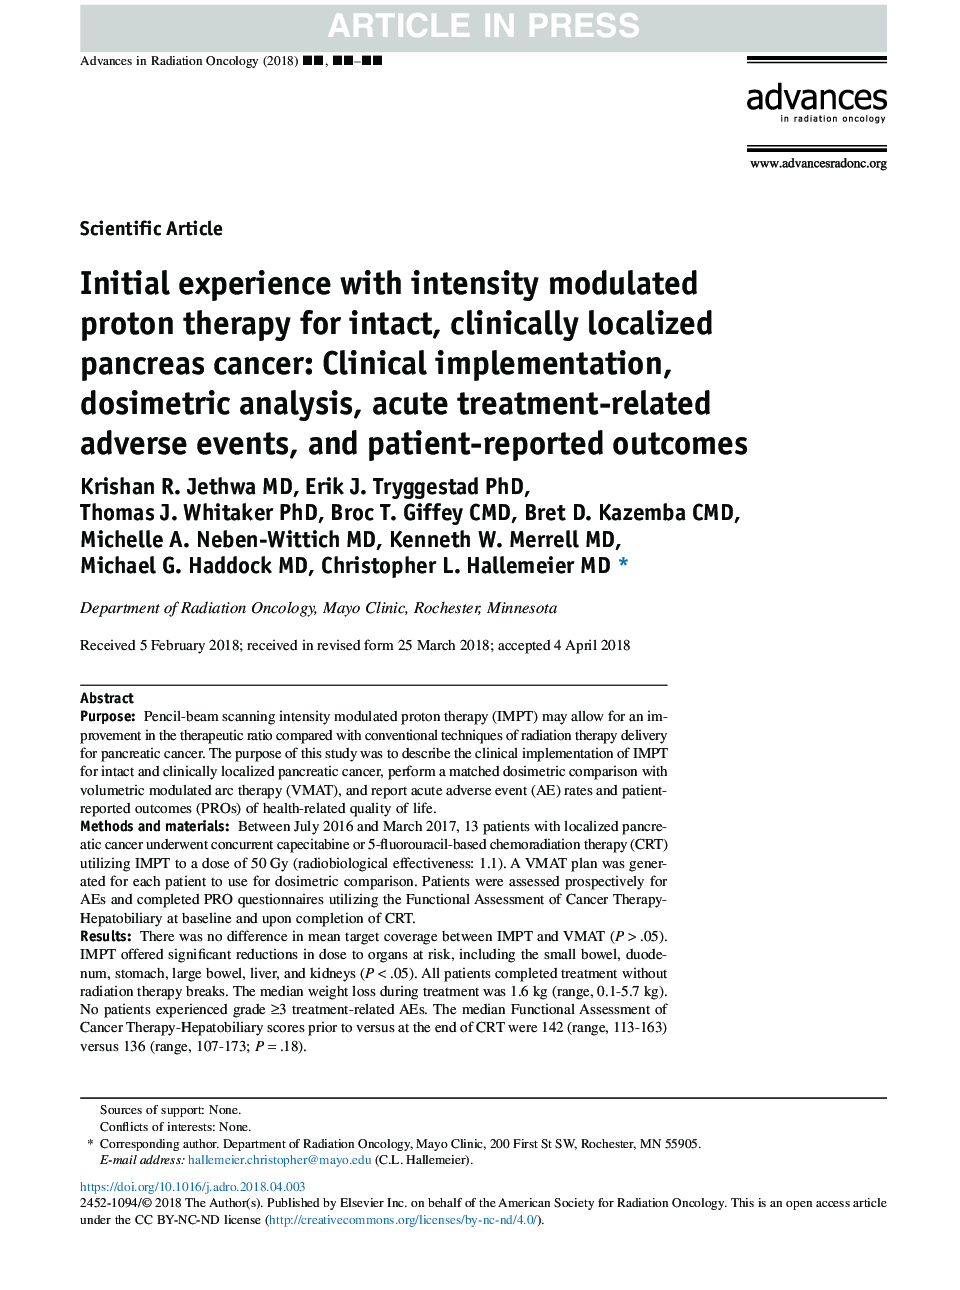 Initial experience with intensity modulated proton therapy for intact, clinically localized pancreas cancer: Clinical implementation, dosimetric analysis, acute treatment-related adverse events, and patient-reported outcomes